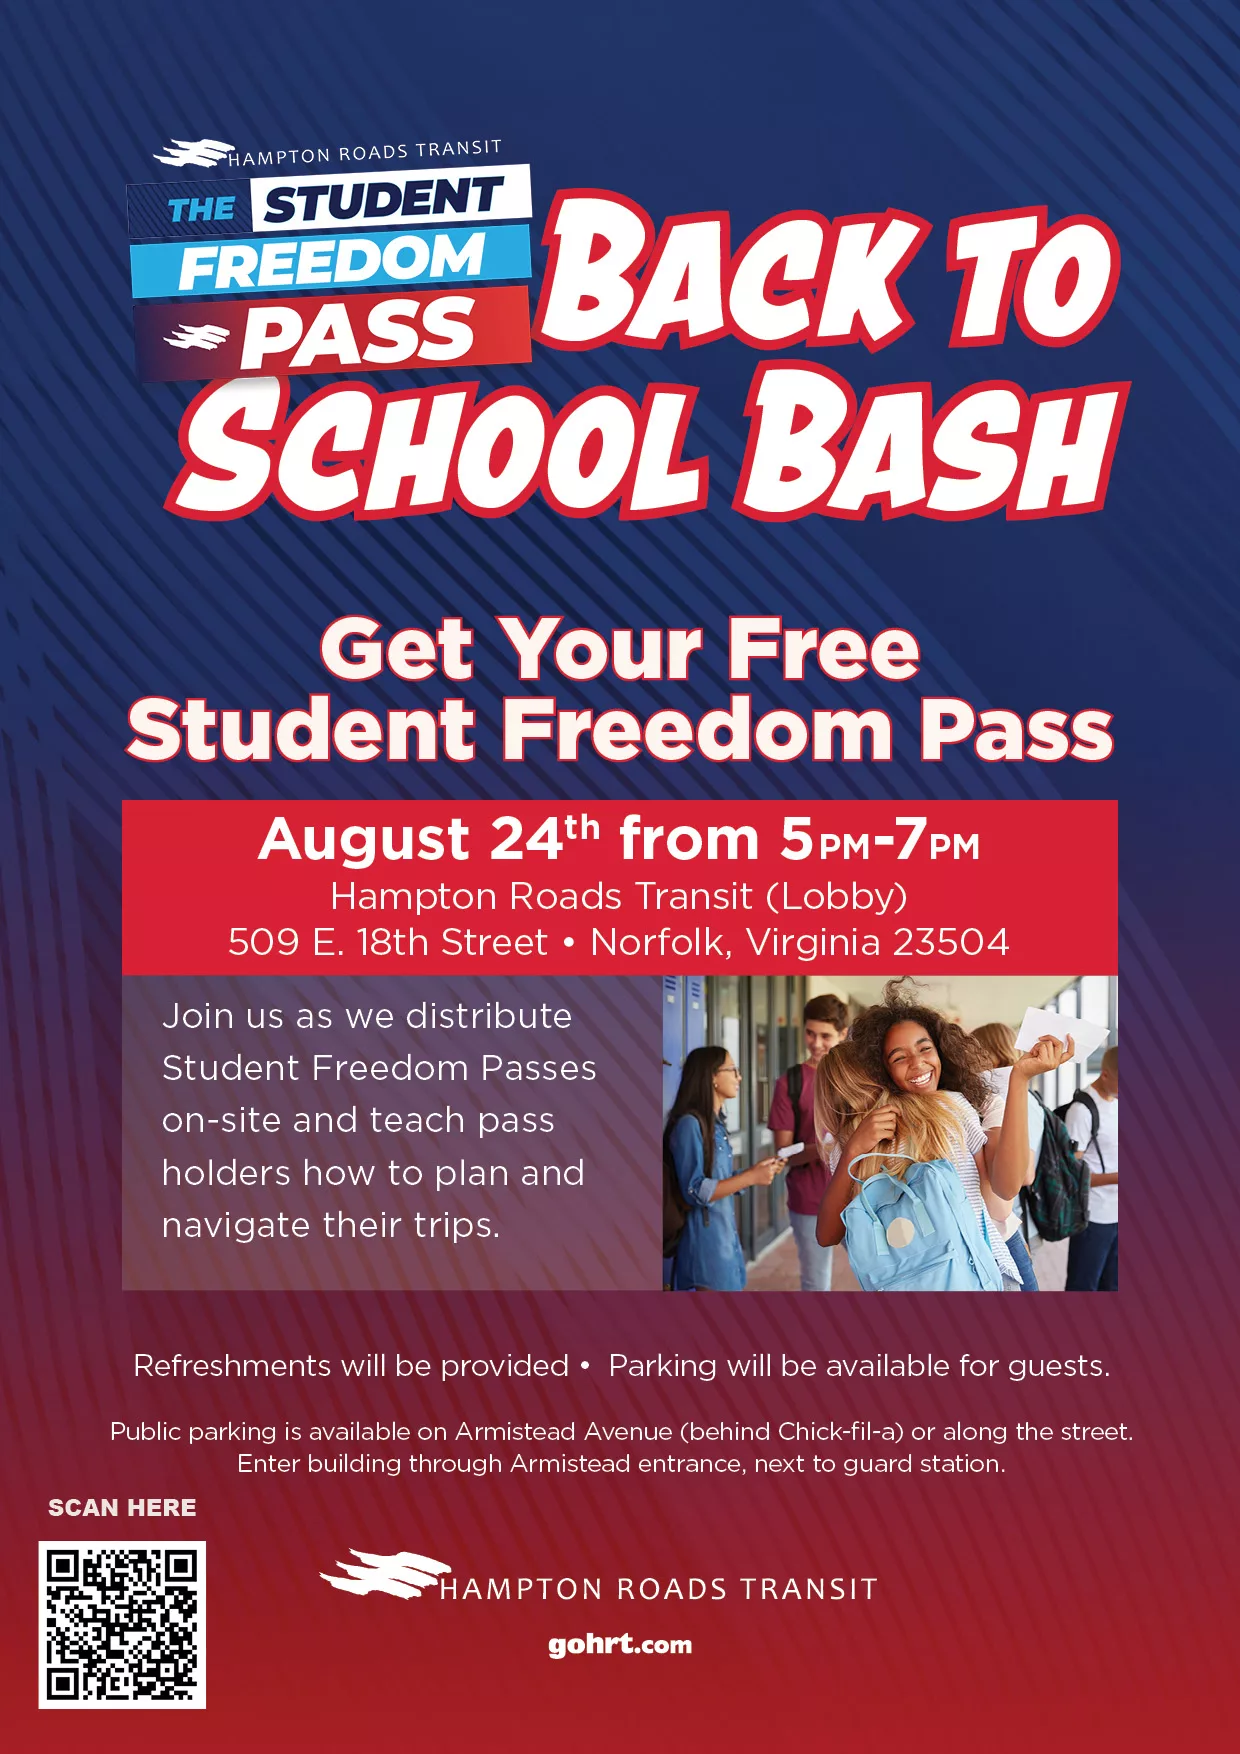 HRT to Host Student Freedom Pass Sign-up Event